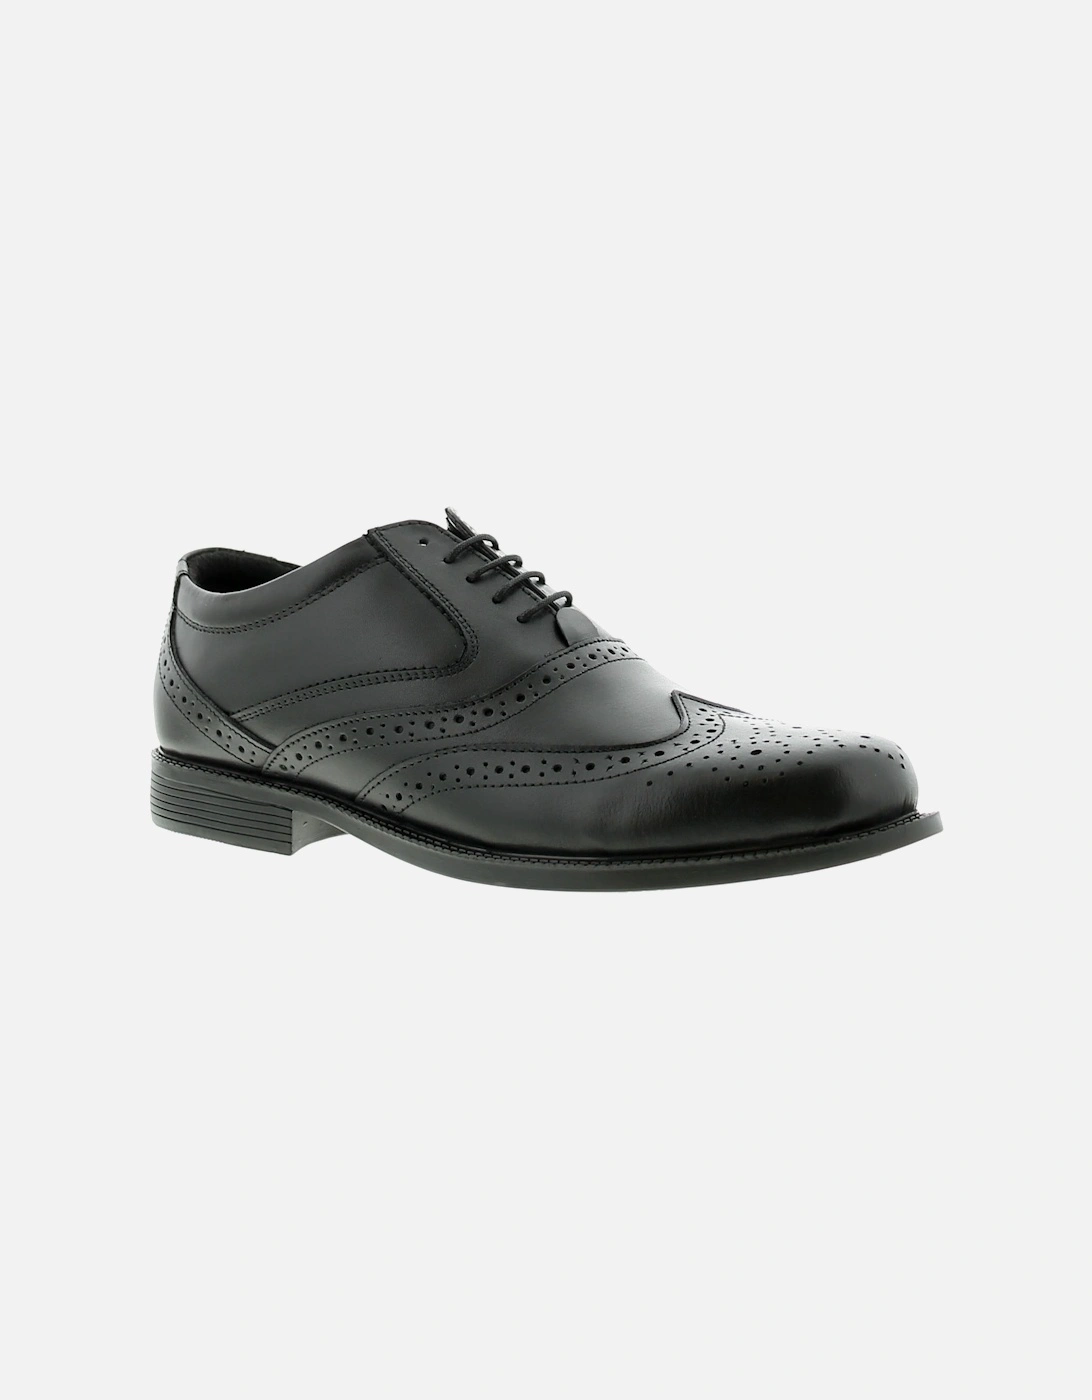 Mens Shoes Work School Formal Lloyd Leather Lace Up black UK Size, 6 of 5